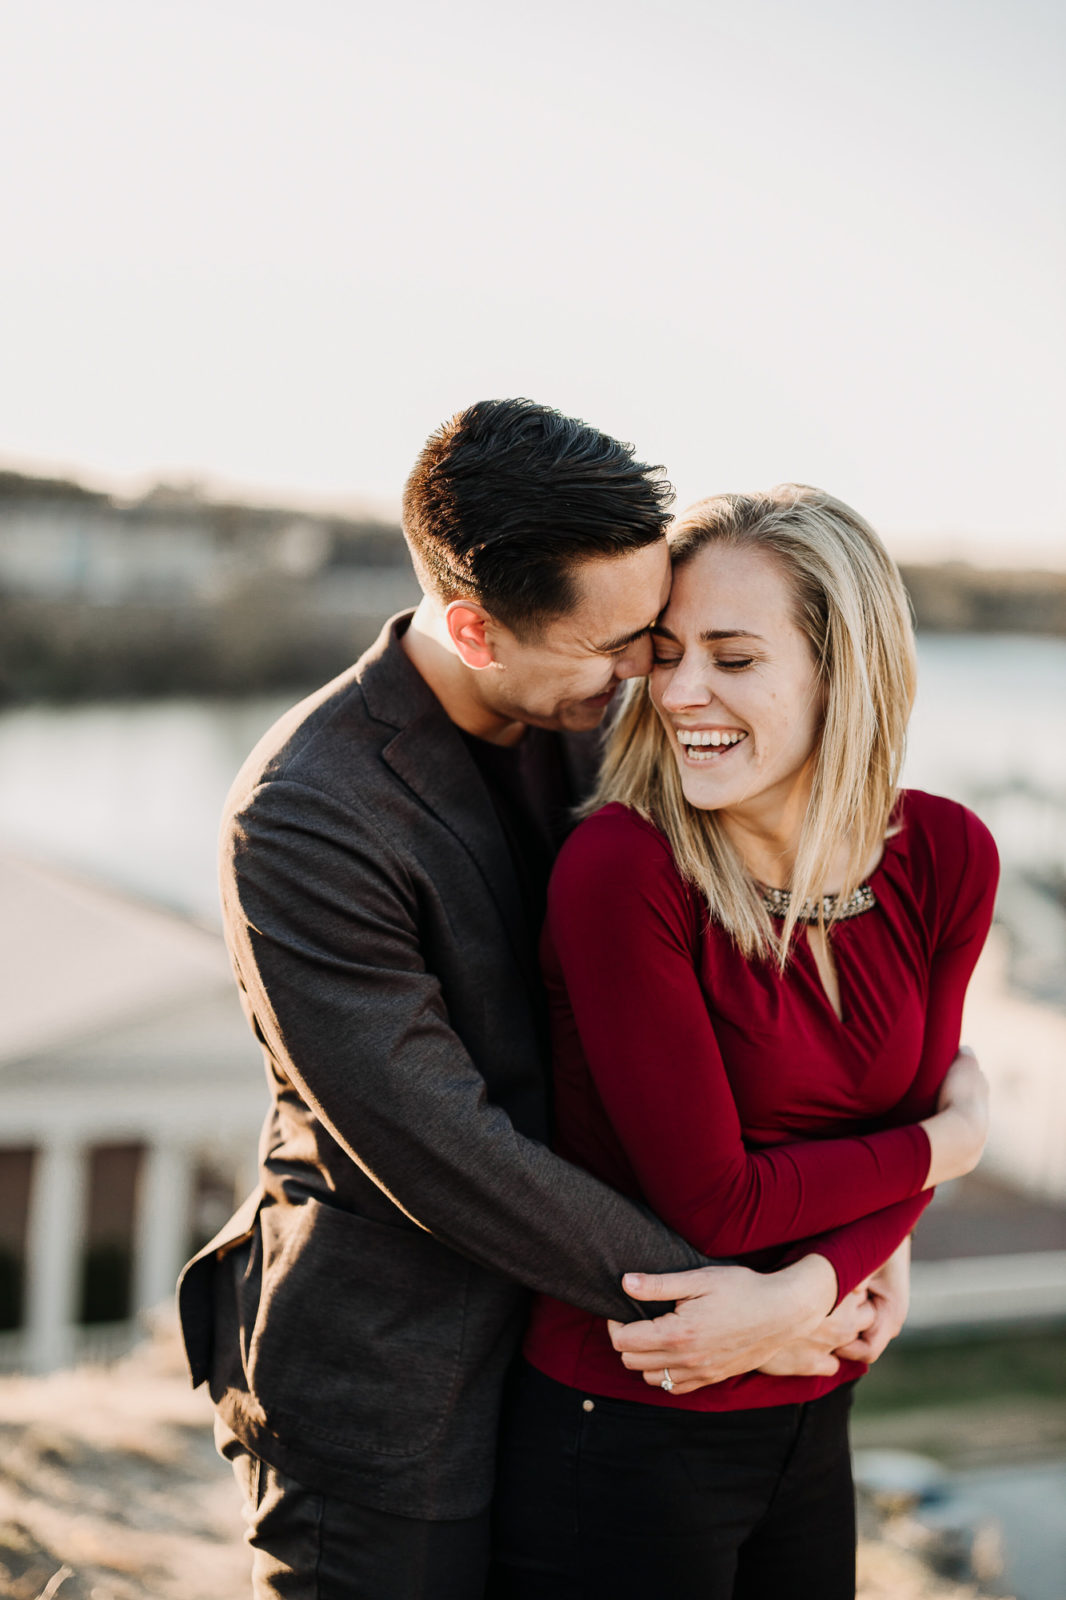 BRIDGET AND STEVEN | PROPOSAL AND ENGAGEMENT | PHILADELPHIA MUSEUM OF ...